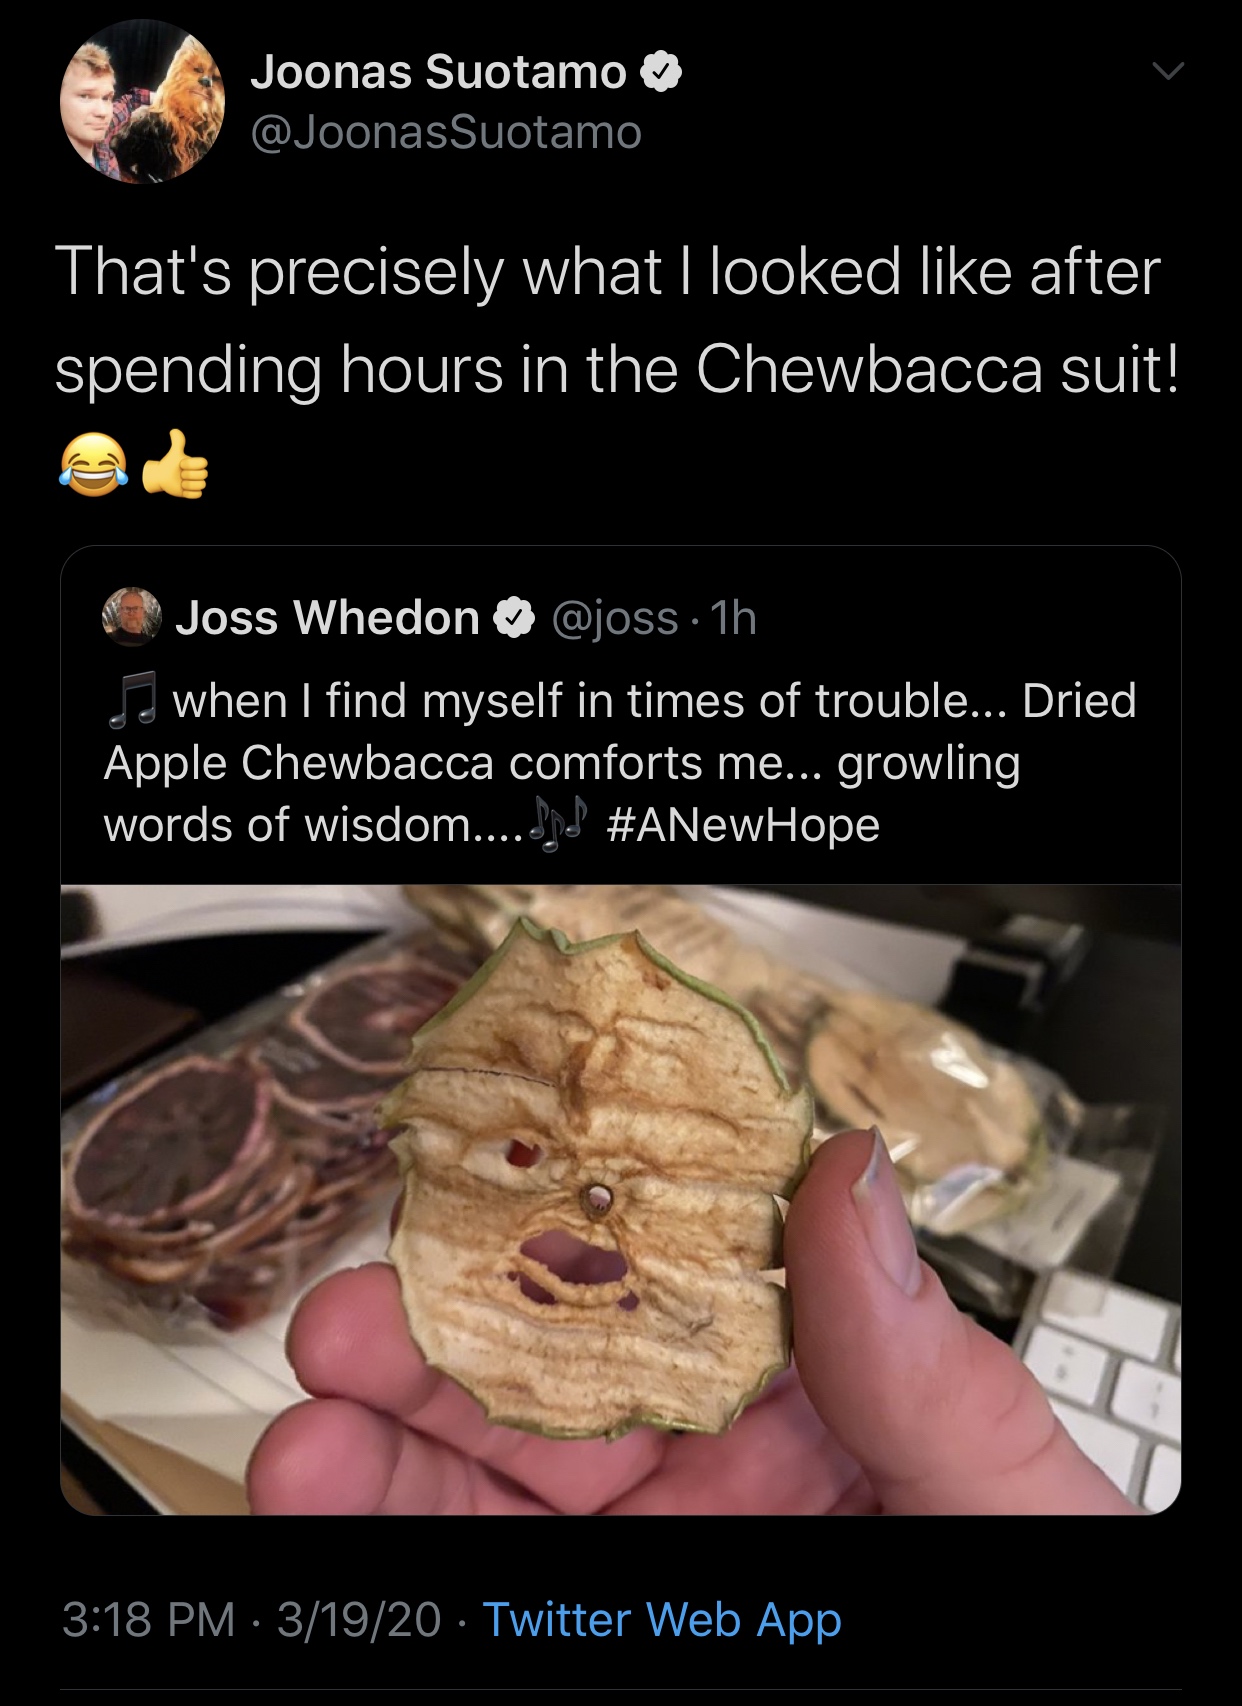 photo caption - Joonas Suotamo That's precisely what I looked after spending hours in the Chewbacca suit! Joss Whedon 1h when I find myself in times of trouble... Dried Apple Chewbacca comforts me... growling words of wisdom....Jd 31920 Twitter Web App